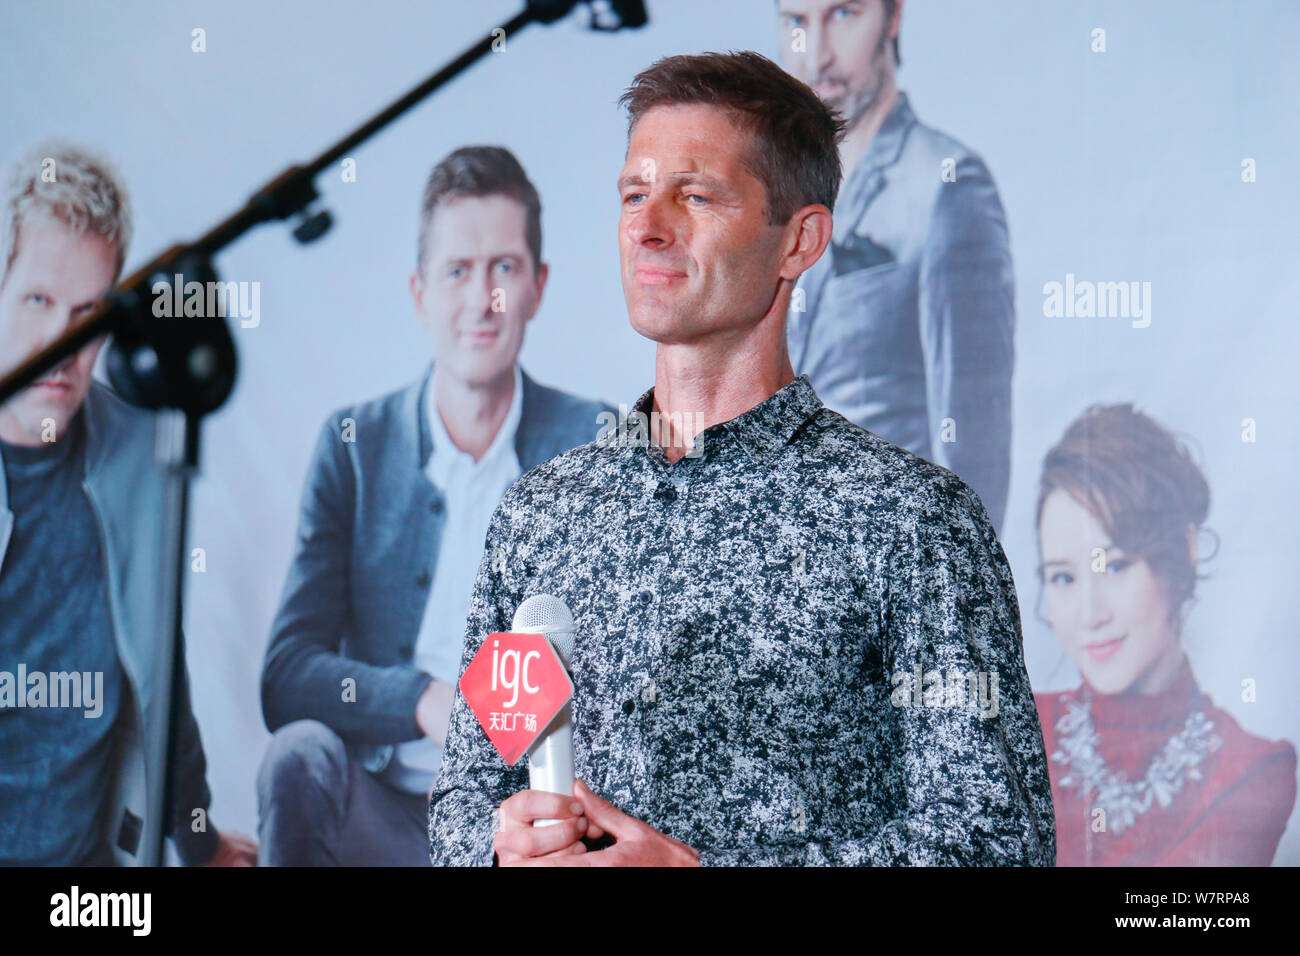 Kare Wanscher of Danish rock band Michael Learns to Rock (MLTR) attends a press conference to promote their China concert tour in Guangzhou city, sout Stock Photo